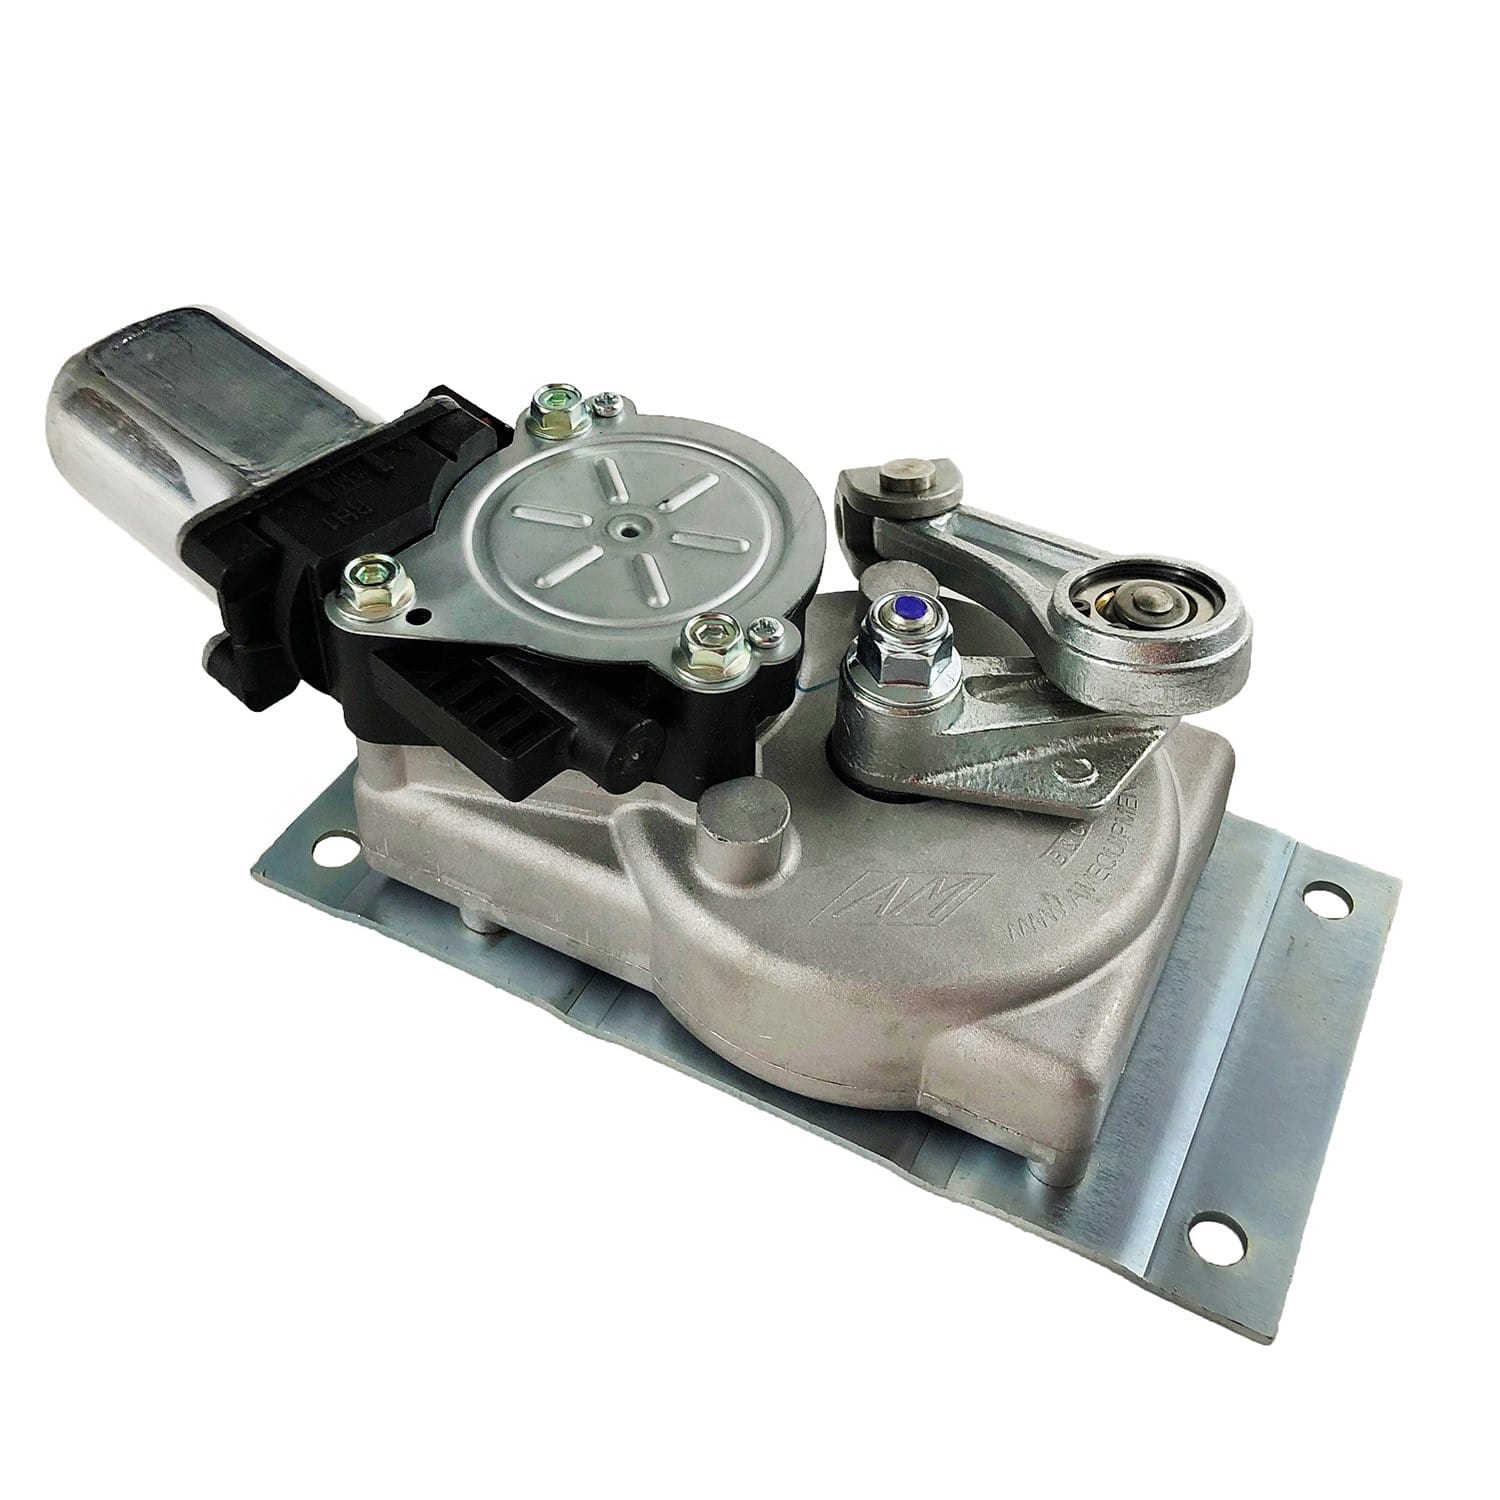 AM Equipment 110-1024 Gearbox With 214 Series Motor Straight C, 5:1